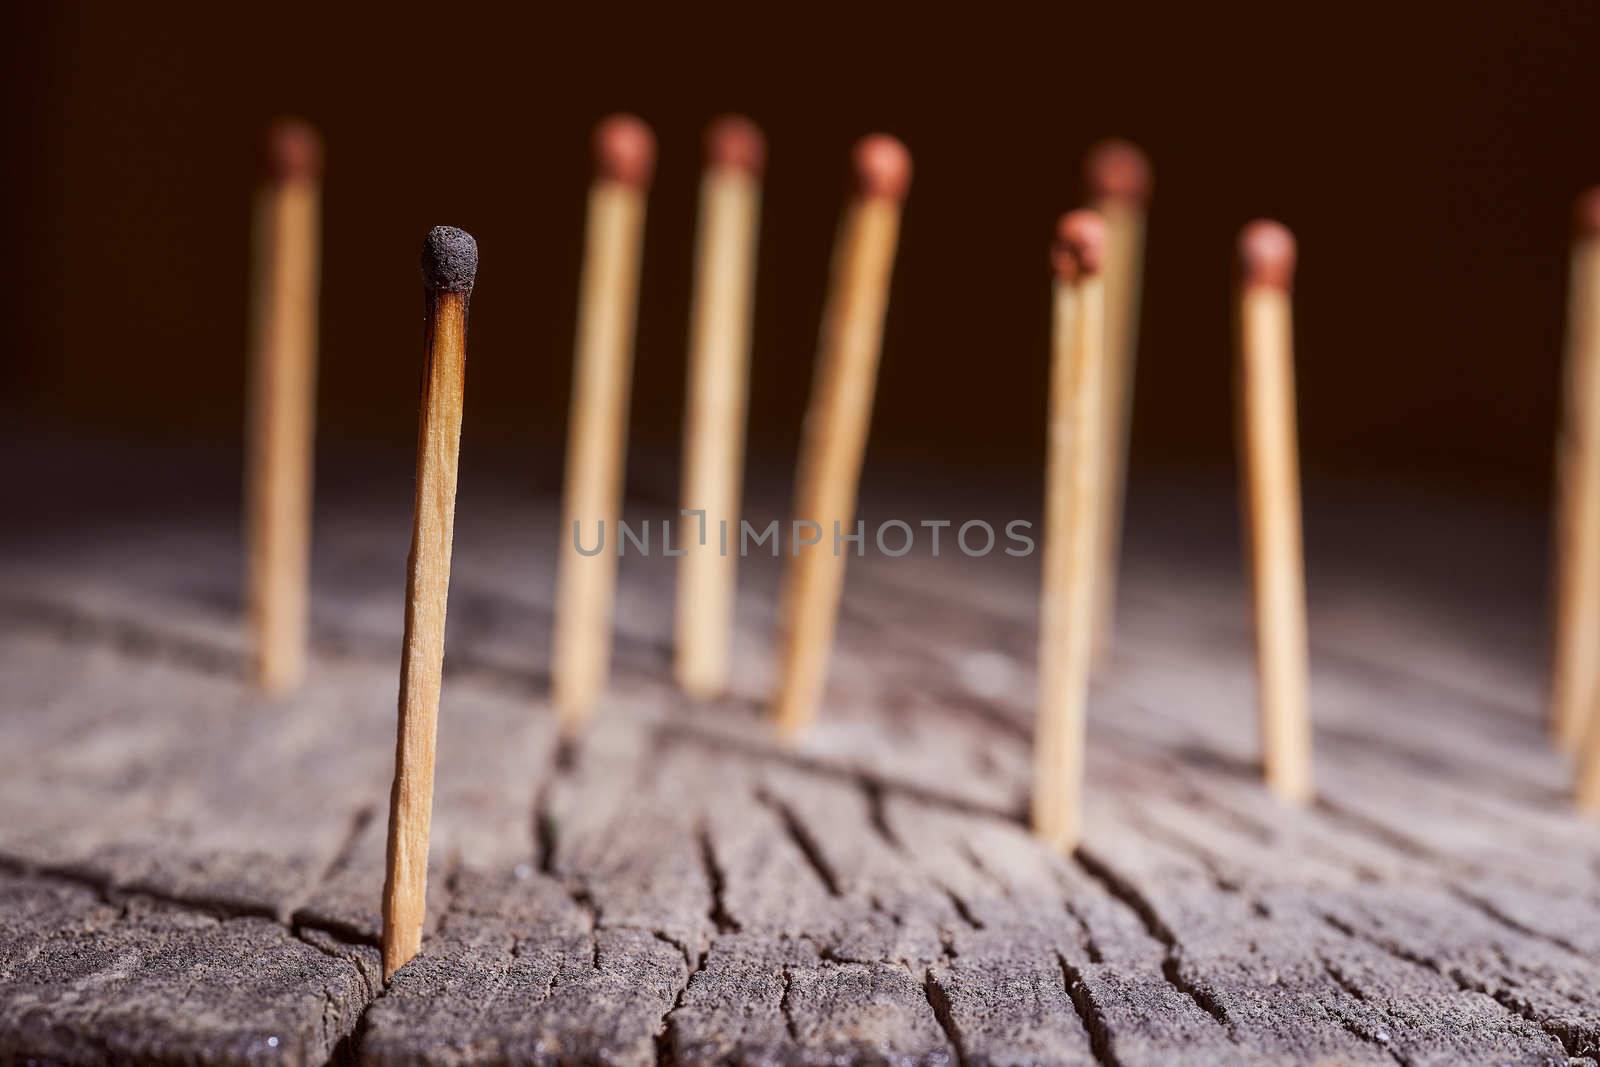 wooden matches are on the wooden frame. Concept photo. High quality photo